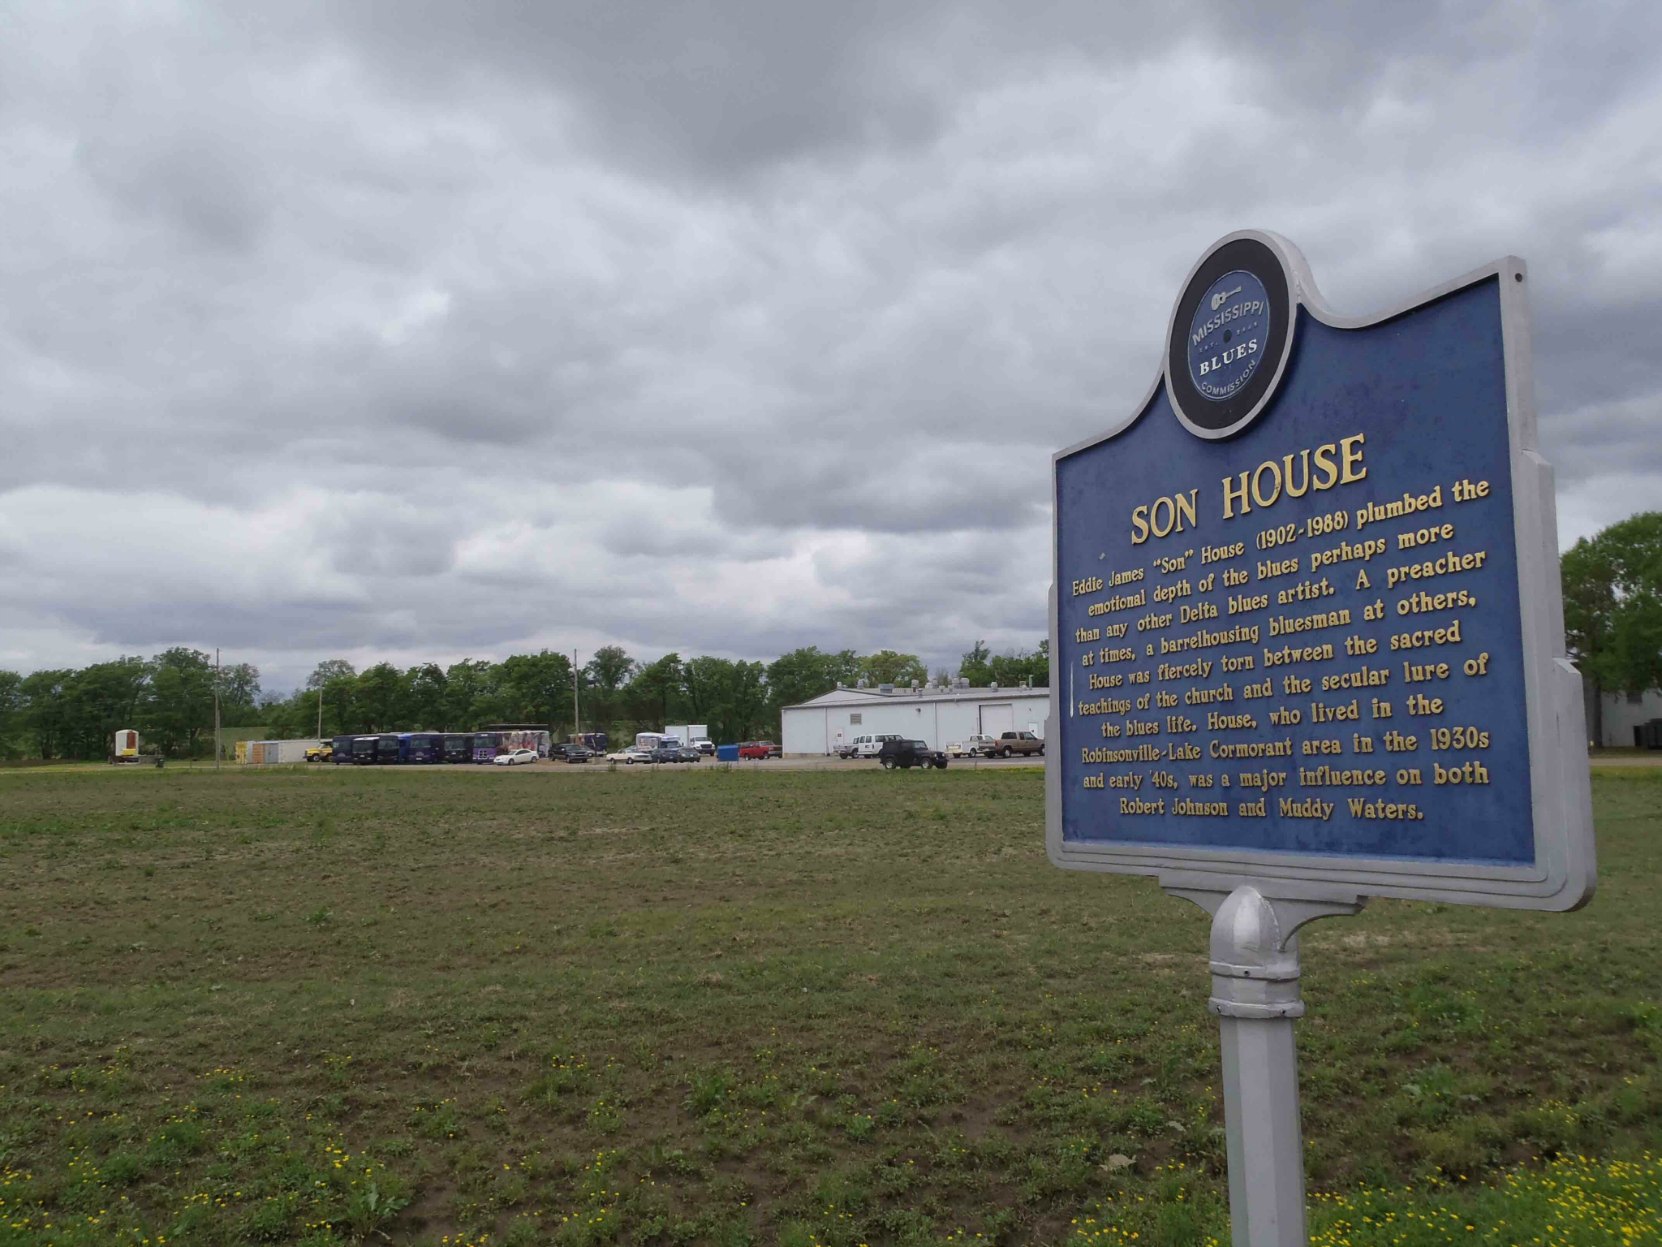 Mississippi Blues Trail marker for Son House, Lake Cormorant, Tunica County, Mississippi